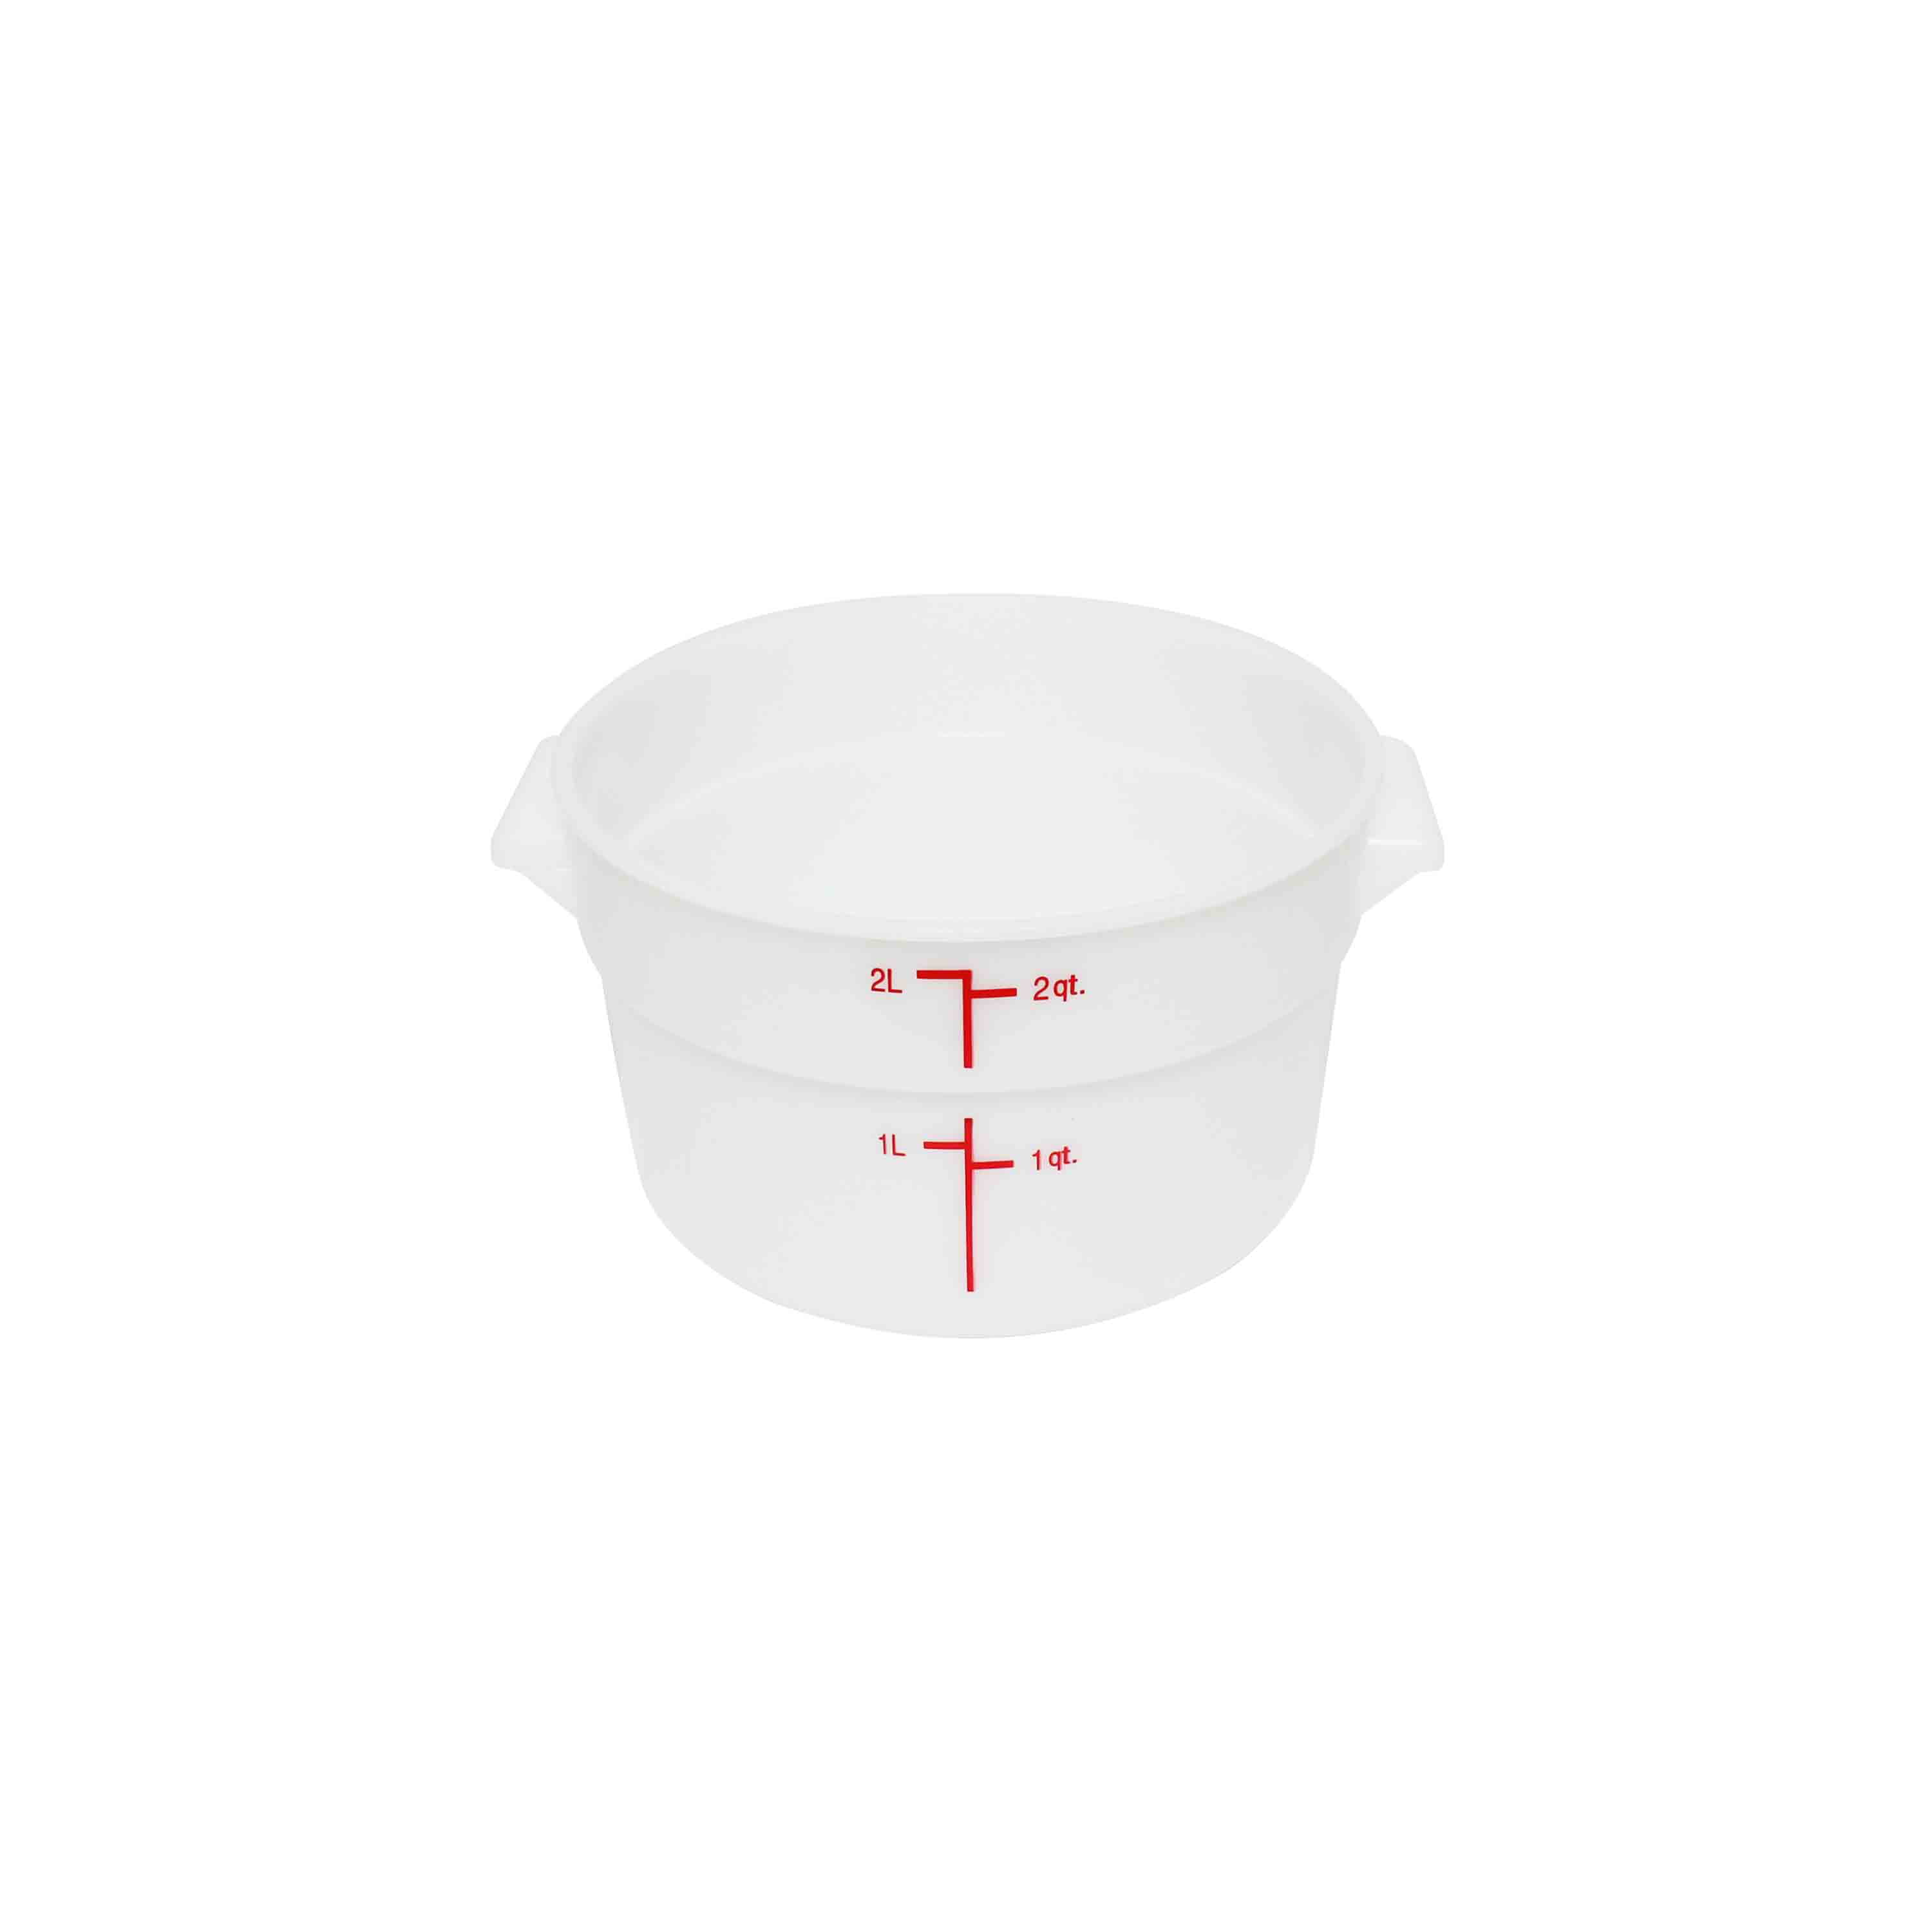 Excellante 2 quart round food storage container, pp, white, NSF certified, comes in each